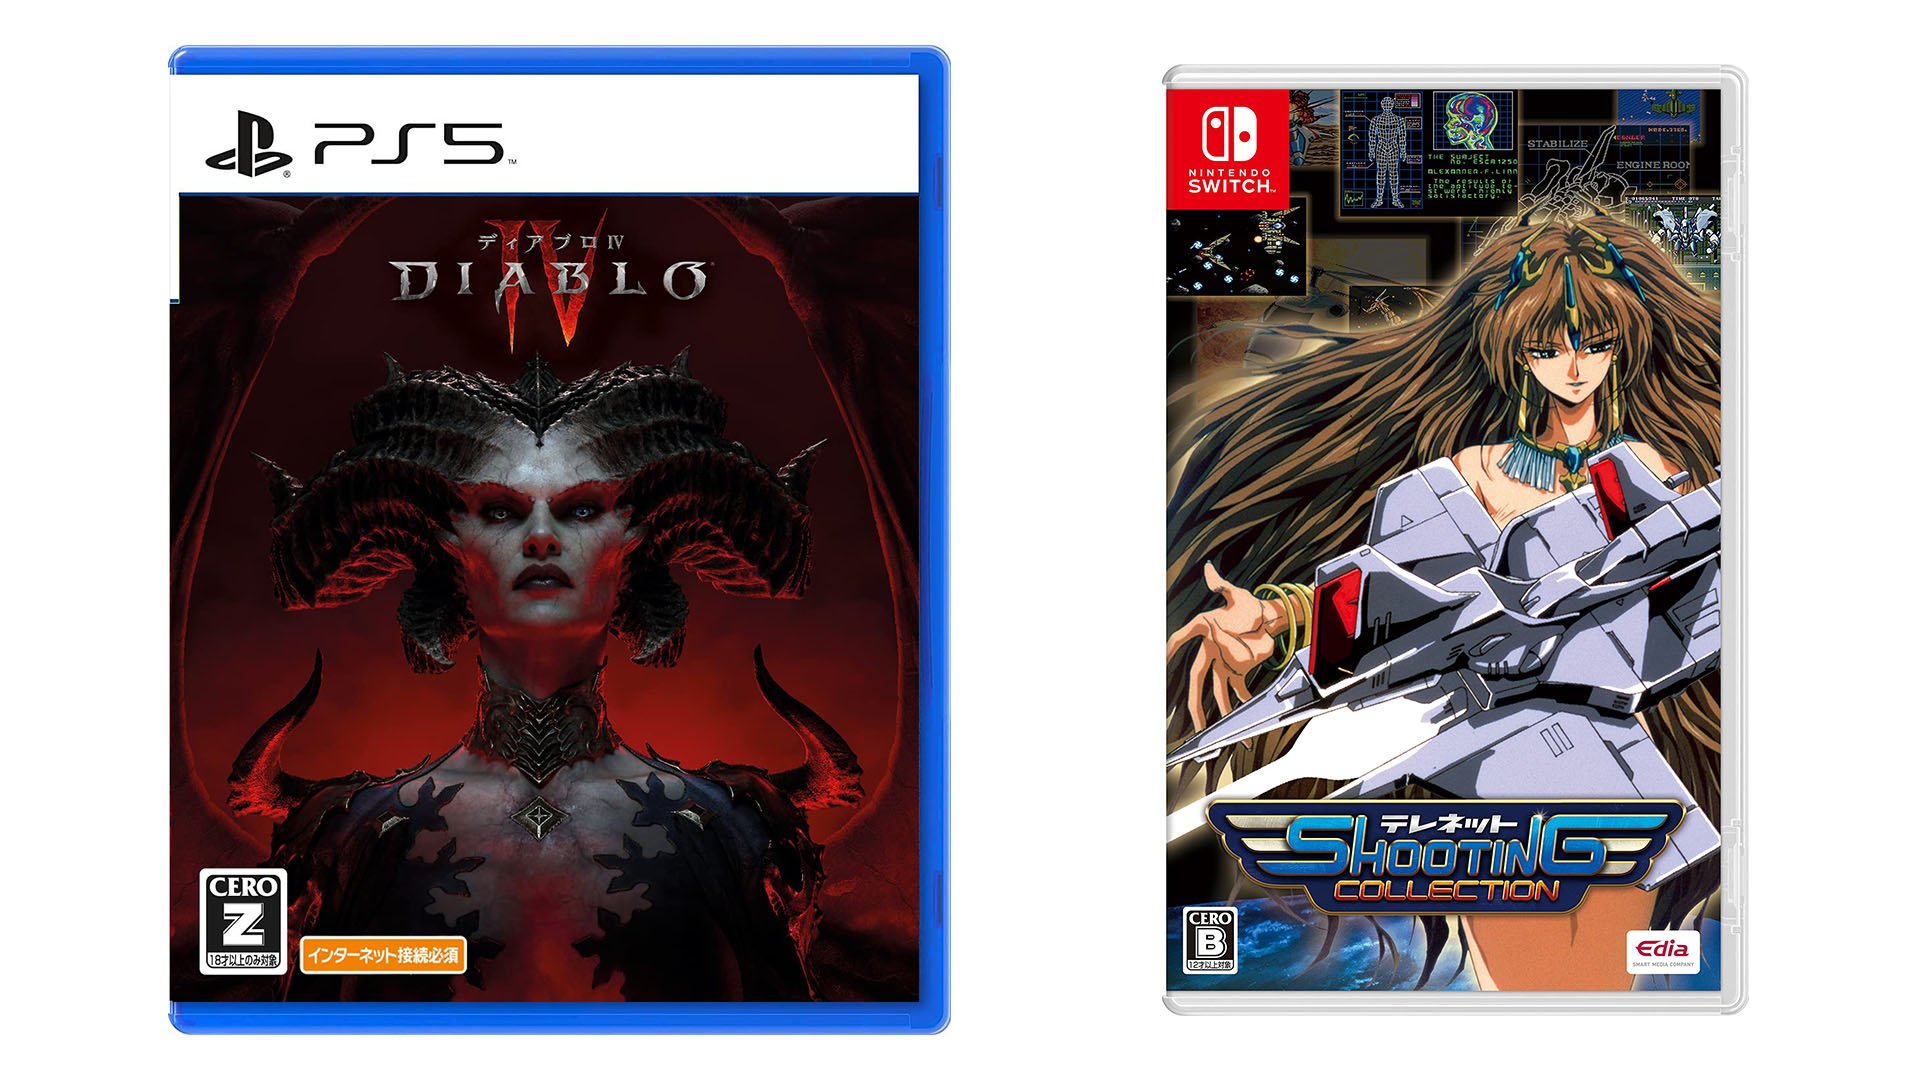 #
      This Week’s Japanese Game Releases: Diablo IV, Telenet Shooting Collection, more